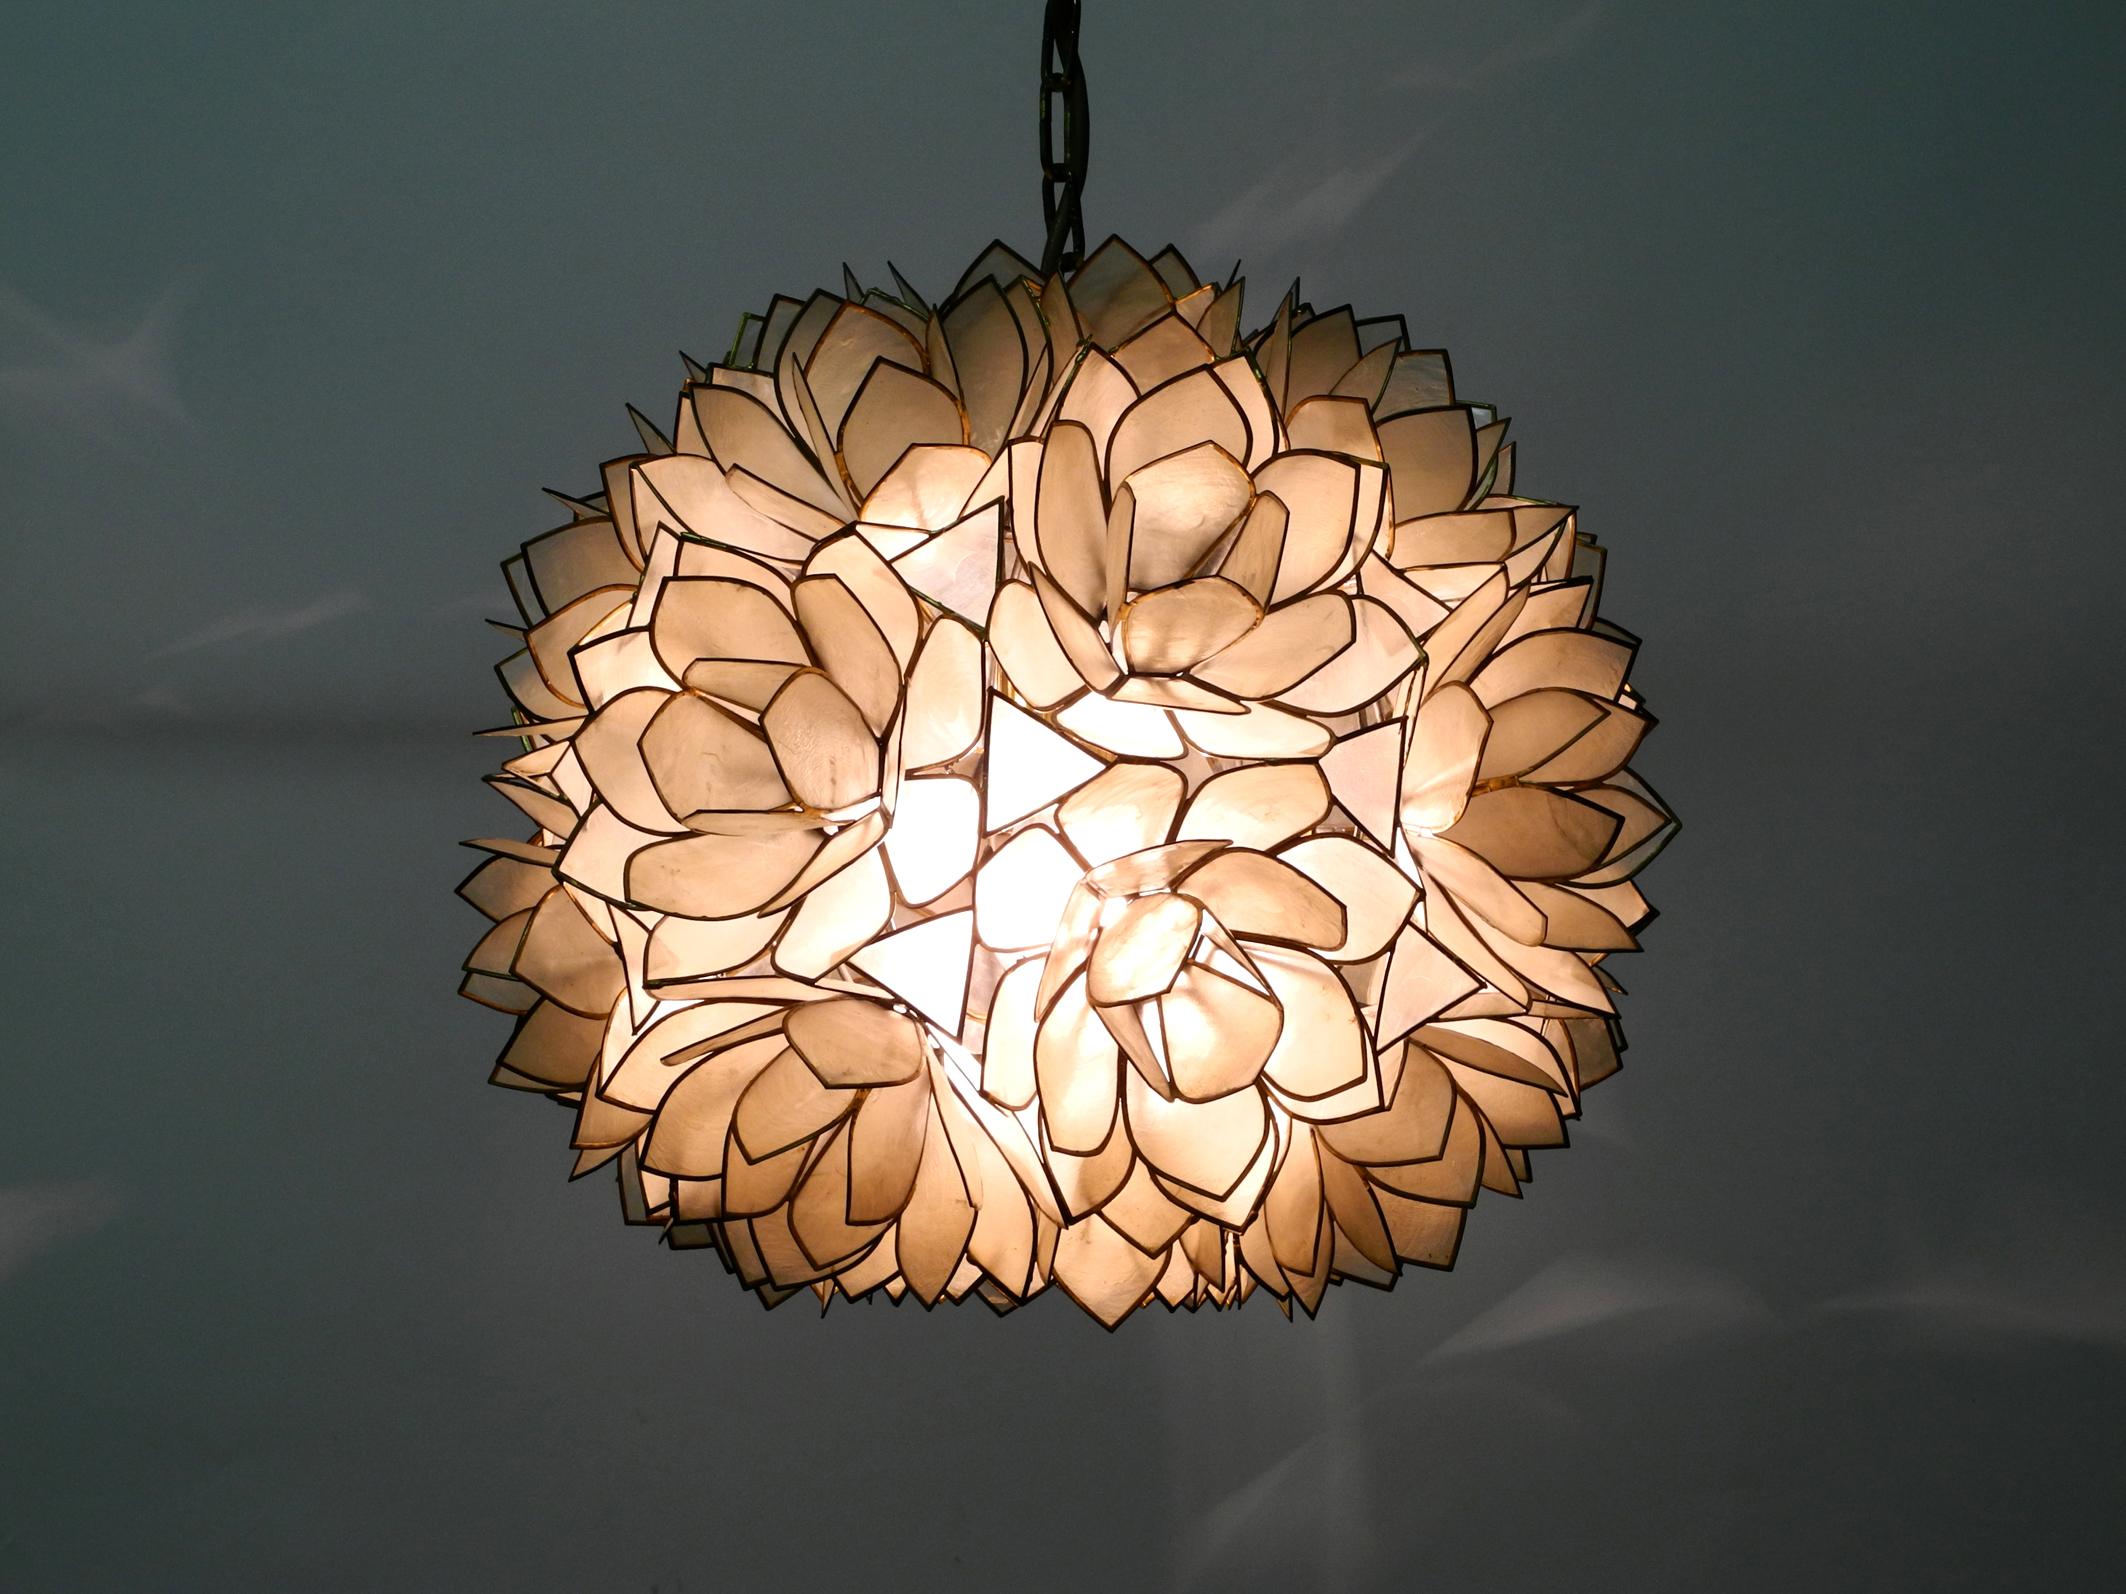 1970s Spherical Pendant Lamp Made of Mother of Pearl in the Look of a Flower 6